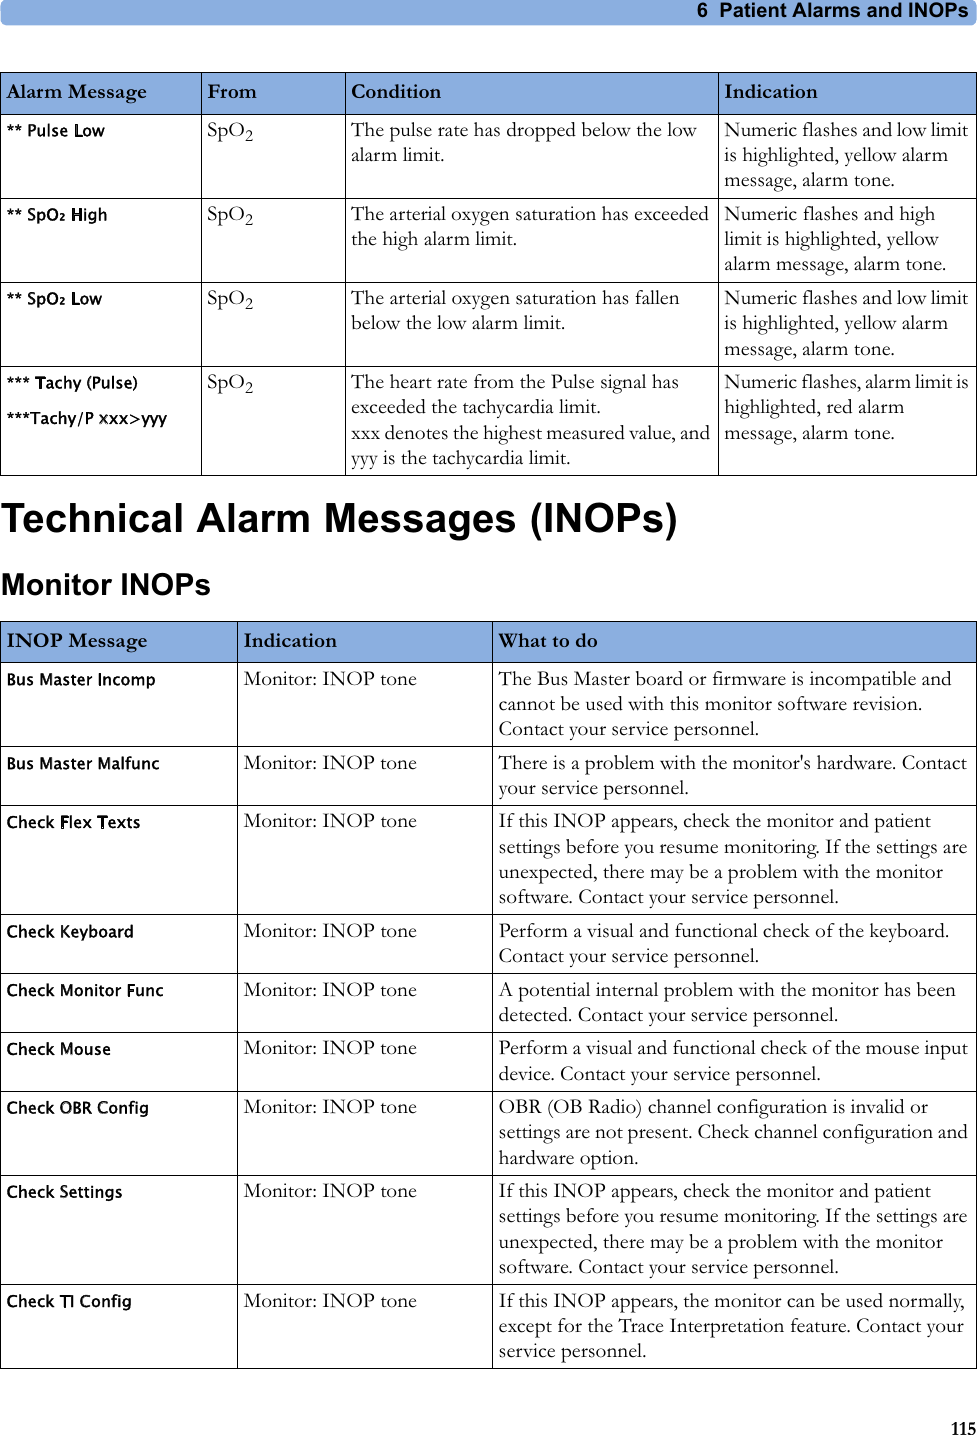 6  Patient Alarms and INOPs115Technical Alarm Messages (INOPs)Monitor INOPs** Pulse Low SpO2The pulse rate has dropped below the low alarm limit.Numeric flashes and low limit is highlighted, yellow alarm message, alarm tone.** SpO  High SpO2The arterial oxygen saturation has exceeded the high alarm limit.Numeric flashes and high limit is highlighted, yellow alarm message, alarm tone.** SpO  Low SpO2The arterial oxygen saturation has fallen below the low alarm limit.Numeric flashes and low limit is highlighted, yellow alarm message, alarm tone.*** Tachy (Pulse)***Tachy/P xxx&gt;yyySpO2The heart rate from the Pulse signal has exceeded the tachycardia limit. xxx denotes the highest measured value, and yyy is the tachycardia limit.Numeric flashes, alarm limit is highlighted, red alarm message, alarm tone.Alarm Message From Condition IndicationINOP Message Indication What to doBus Master Incomp Monitor: INOP tone The Bus Master board or firmware is incompatible and cannot be used with this monitor software revision. Contact your service personnel.Bus Master Malfunc Monitor: INOP tone There is a problem with the monitor&apos;s hardware. Contact your service personnel.Check Flex Texts Monitor: INOP tone If this INOP appears, check the monitor and patient settings before you resume monitoring. If the settings are unexpected, there may be a problem with the monitor software. Contact your service personnel.Check Keyboard Monitor: INOP tone Perform a visual and functional check of the keyboard. Contact your service personnel.Check Monitor Func Monitor: INOP tone A potential internal problem with the monitor has been detected. Contact your service personnel.Check Mouse Monitor: INOP tone Perform a visual and functional check of the mouse input device. Contact your service personnel.Check OBR Config Monitor: INOP tone OBR (OB Radio) channel configuration is invalid or settings are not present. Check channel configuration and hardware option.Check Settings Monitor: INOP tone If this INOP appears, check the monitor and patient settings before you resume monitoring. If the settings are unexpected, there may be a problem with the monitor software. Contact your service personnel.Check TI Config Monitor: INOP tone If this INOP appears, the monitor can be used normally, except for the Trace Interpretation feature. Contact your service personnel.